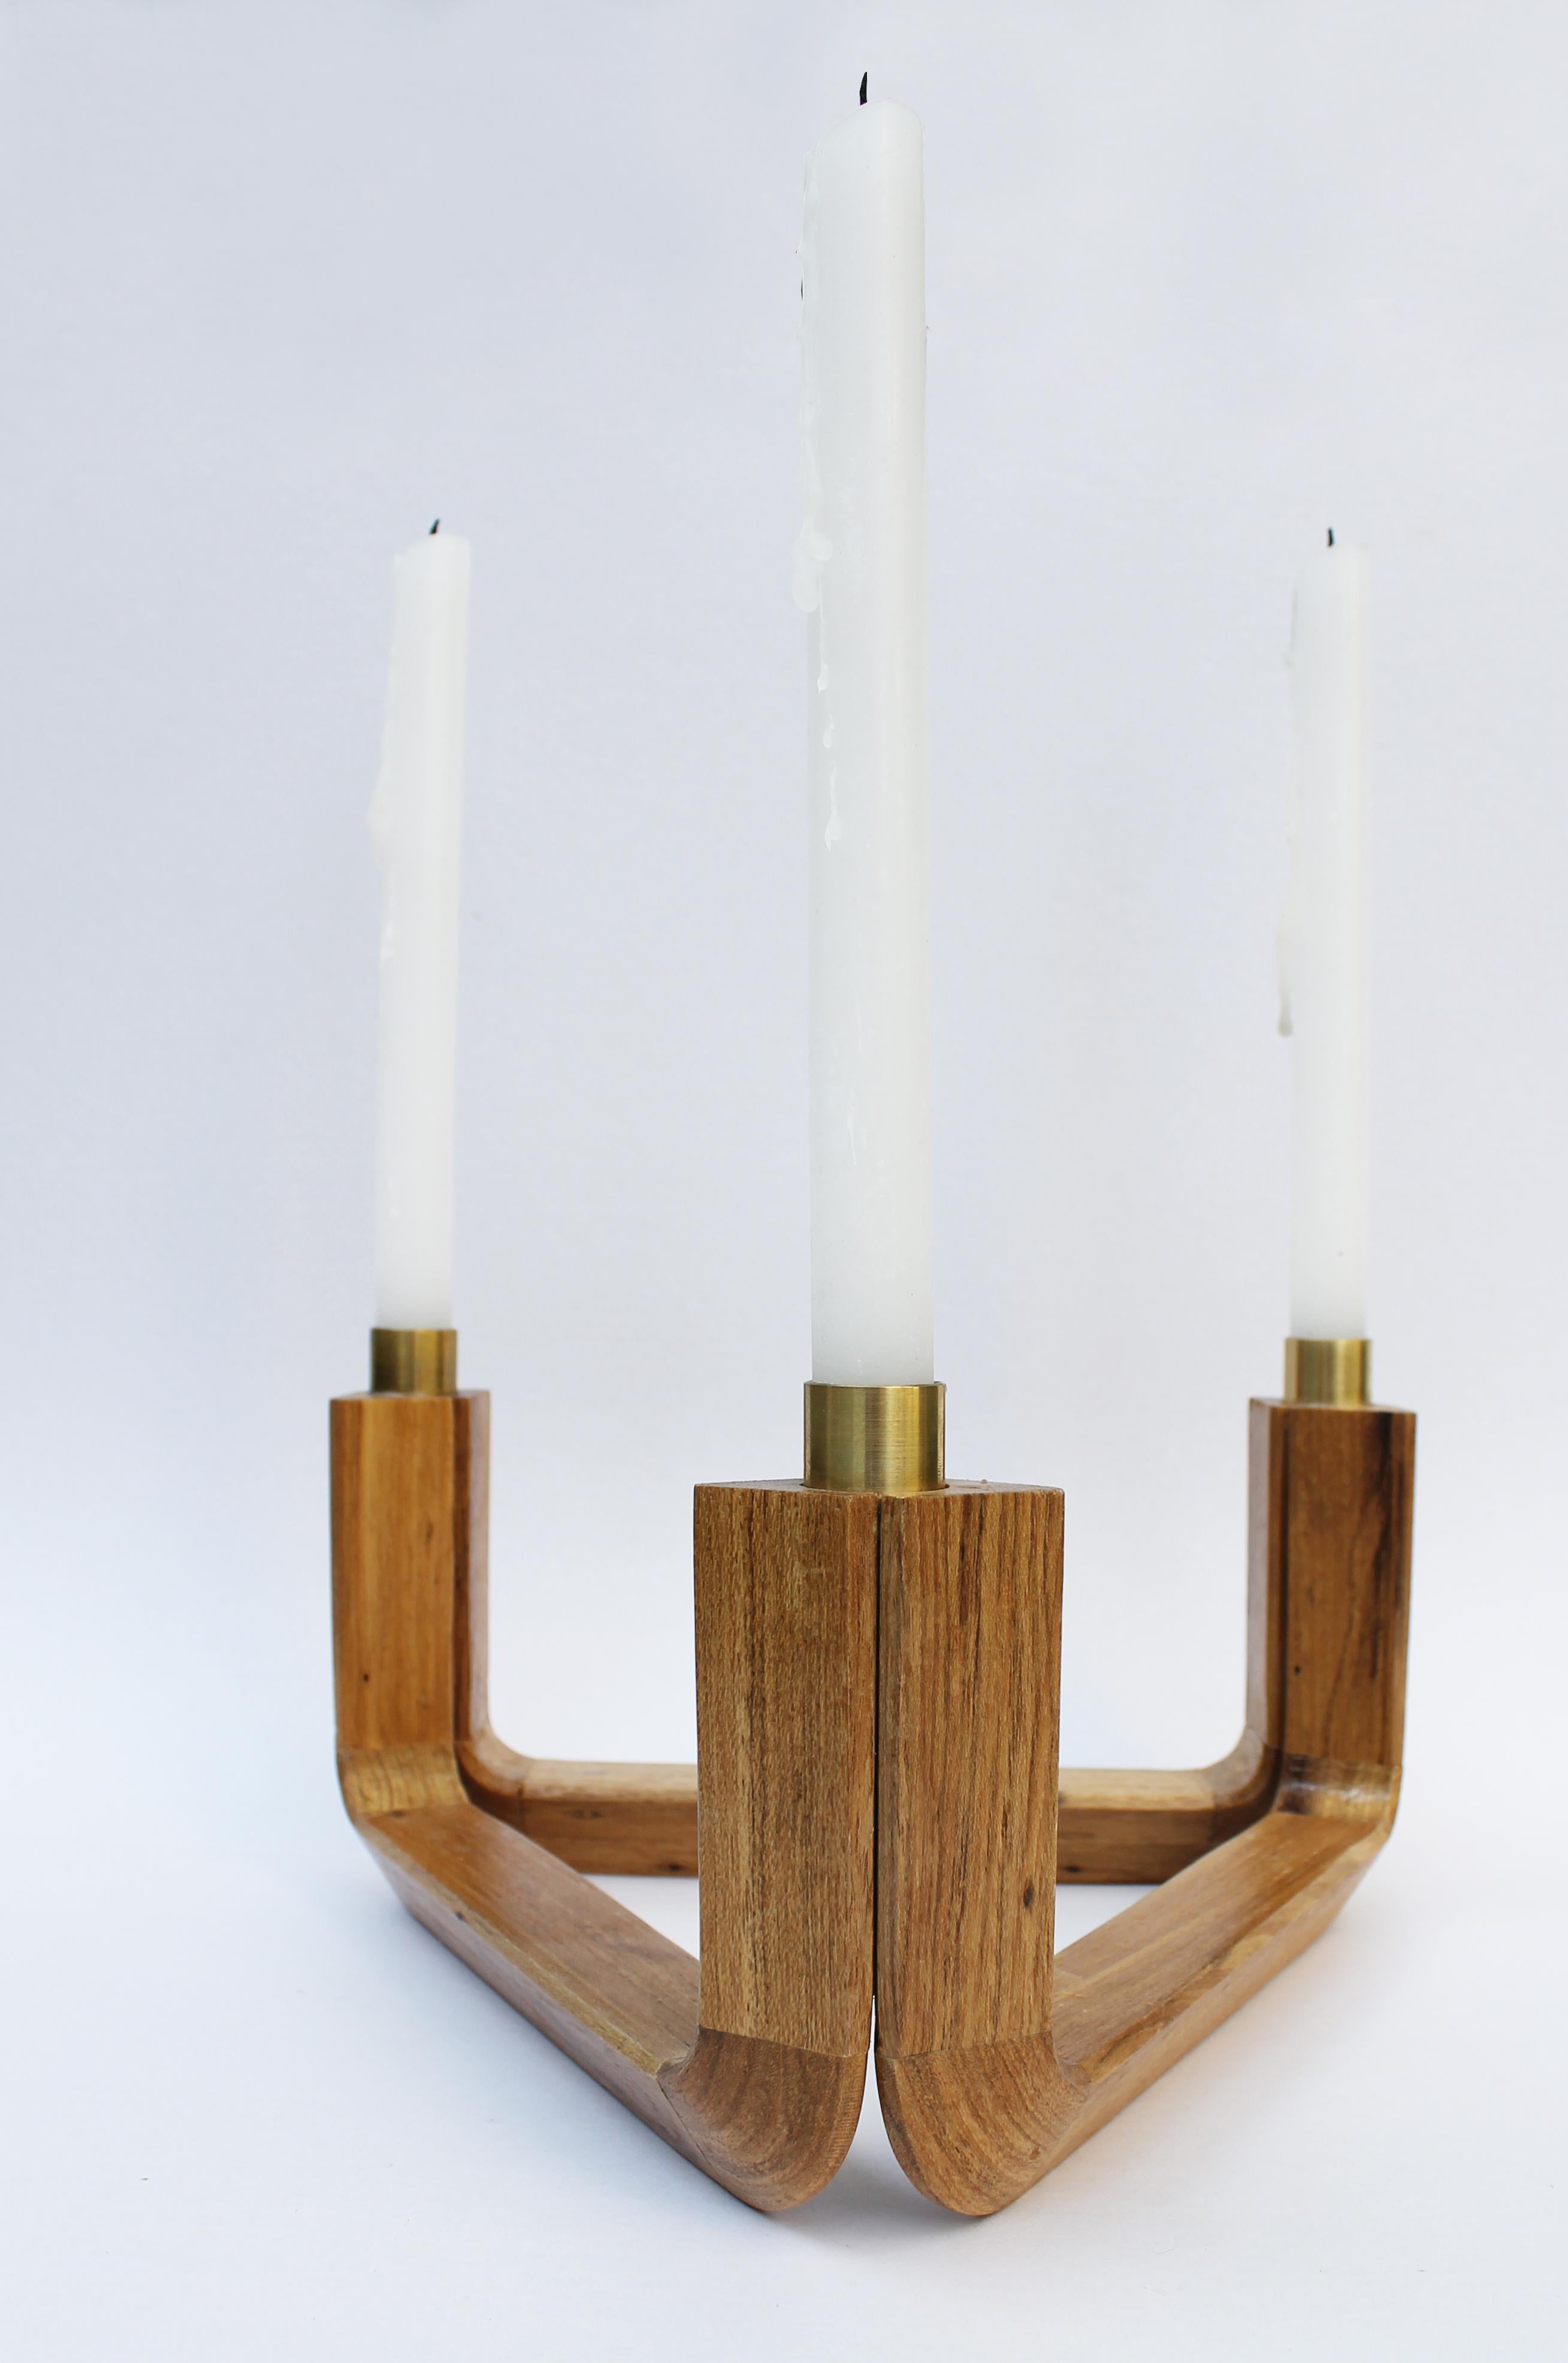 Wood and brass candelabra - contains three candles (25cm x 2.2cm)

Part of the void collection, the candelabra void has the base of Brazilian Freijó wood and brass suports to hold 3 or 5 candles..

Although a solid object, the emptiness is also